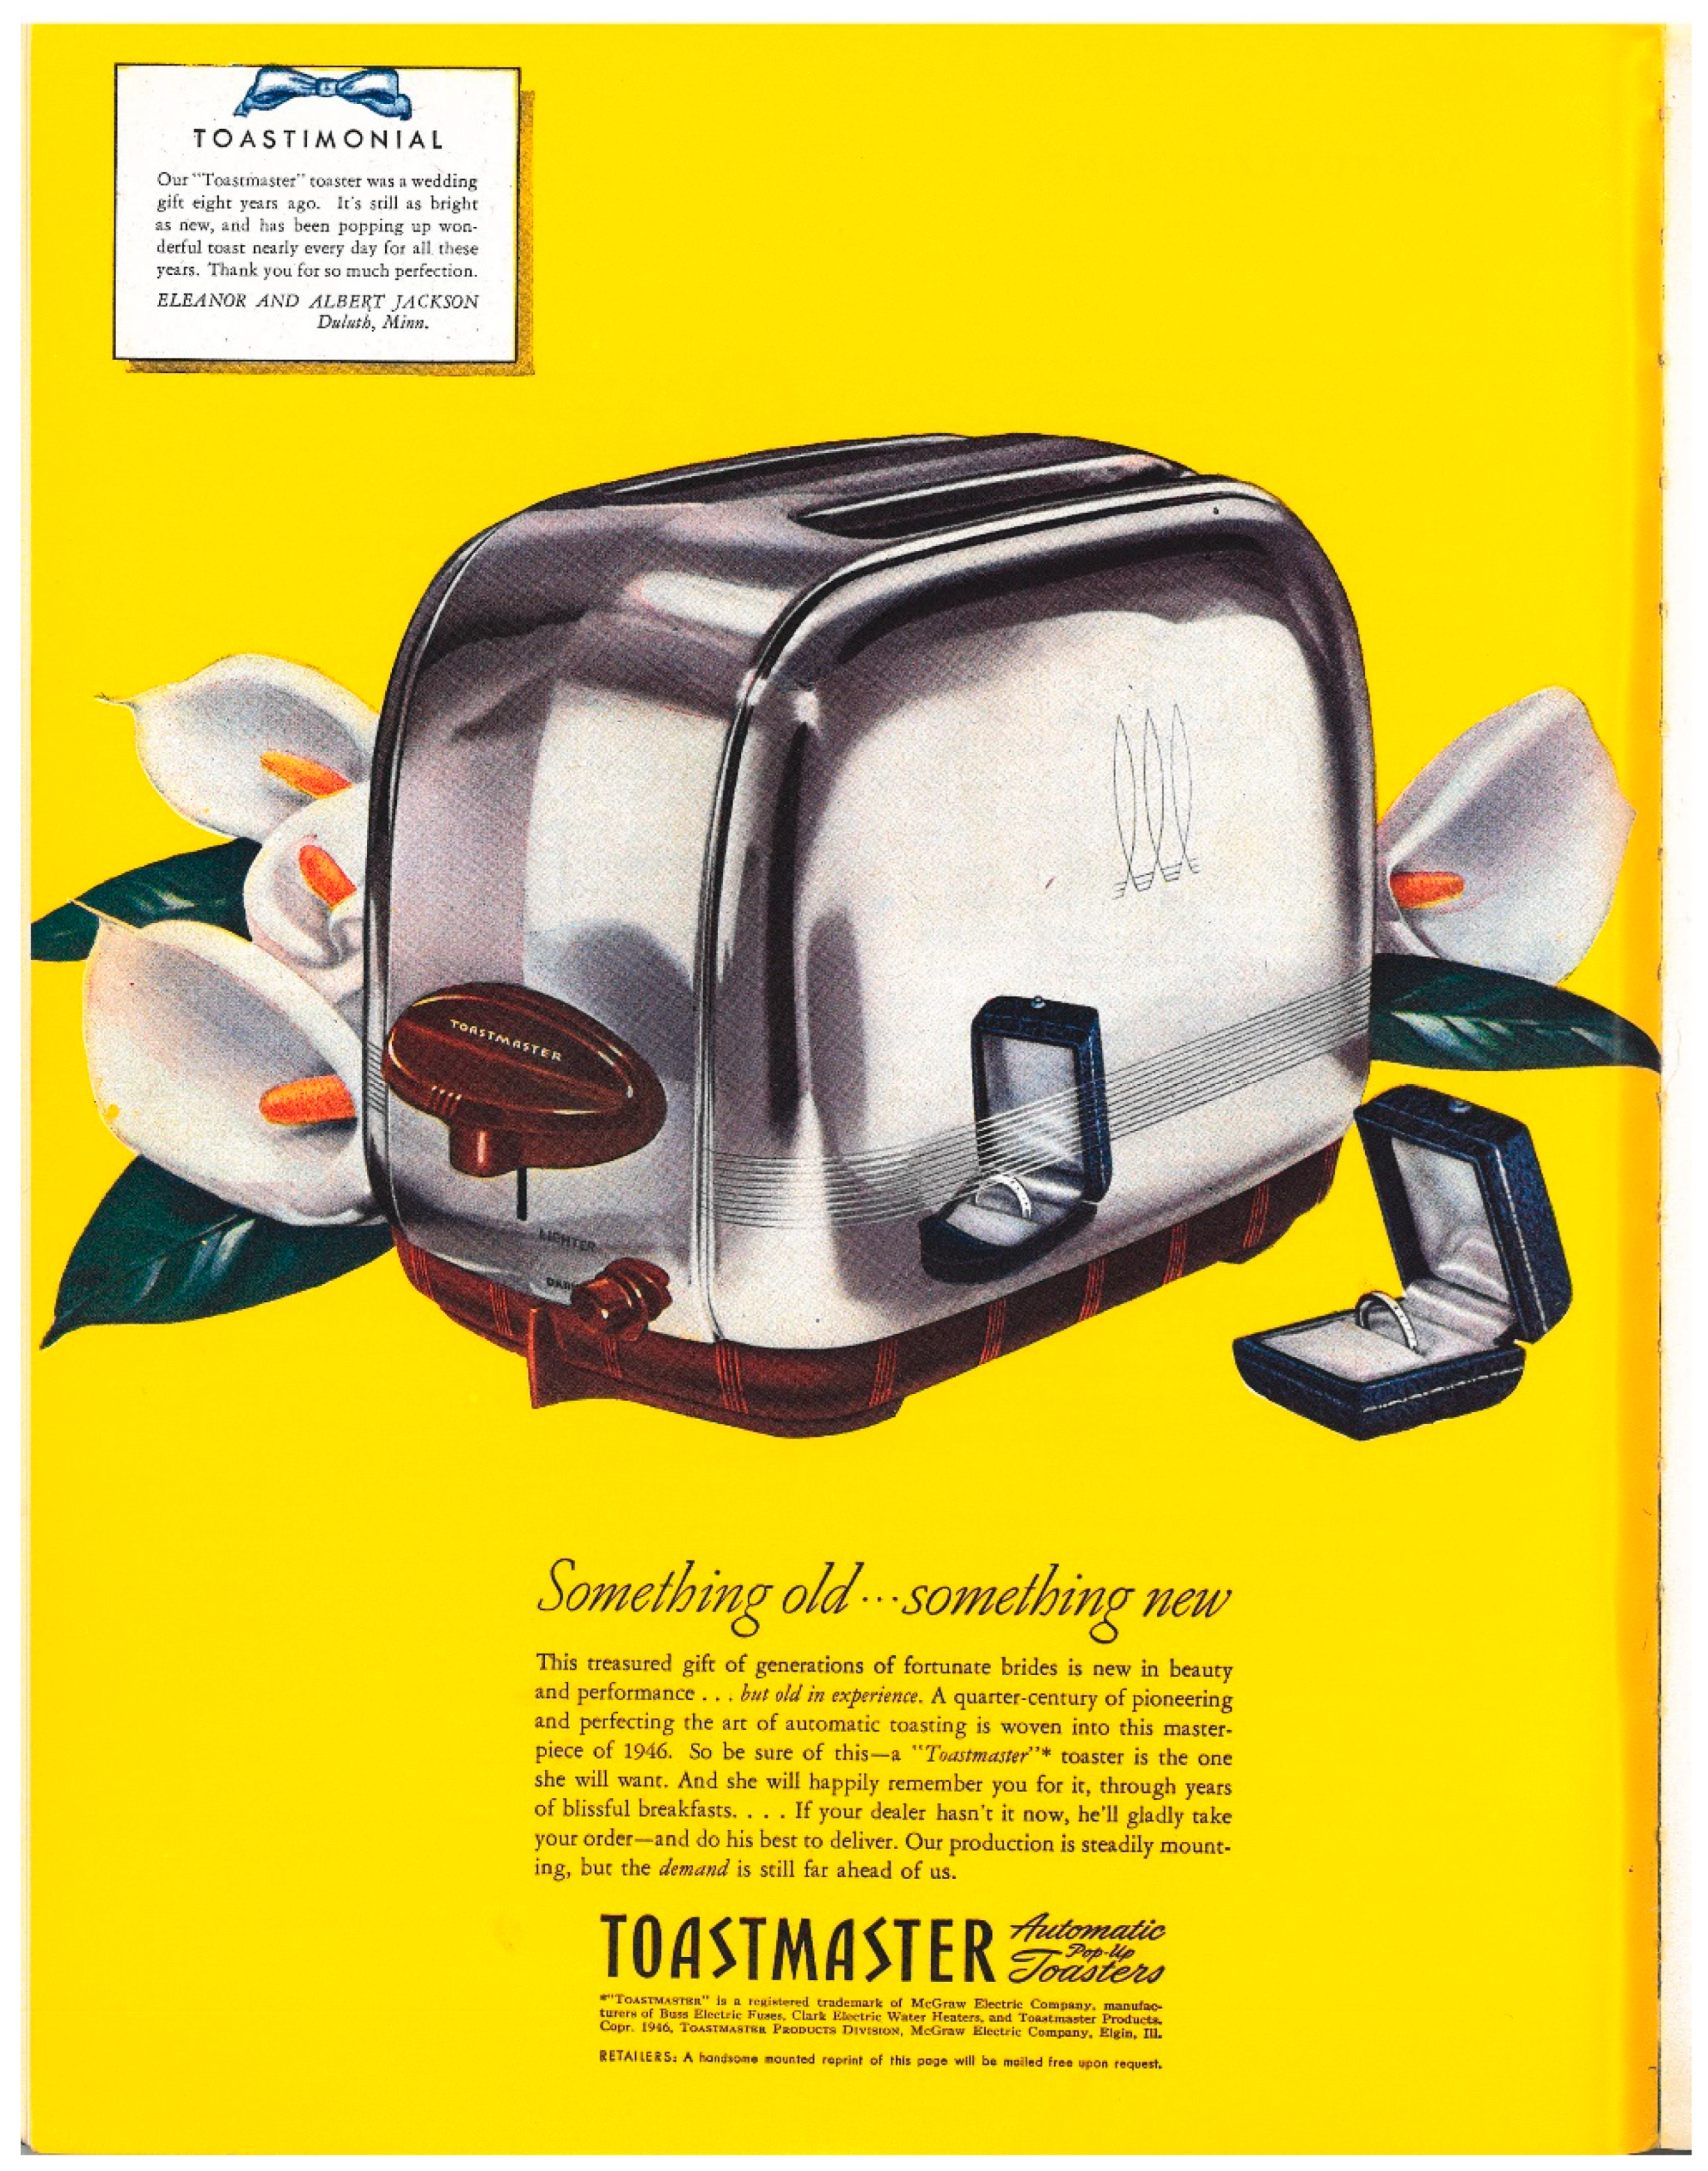 1960s gadgets & small kitchen appliances made life a little easier - Click  Americana